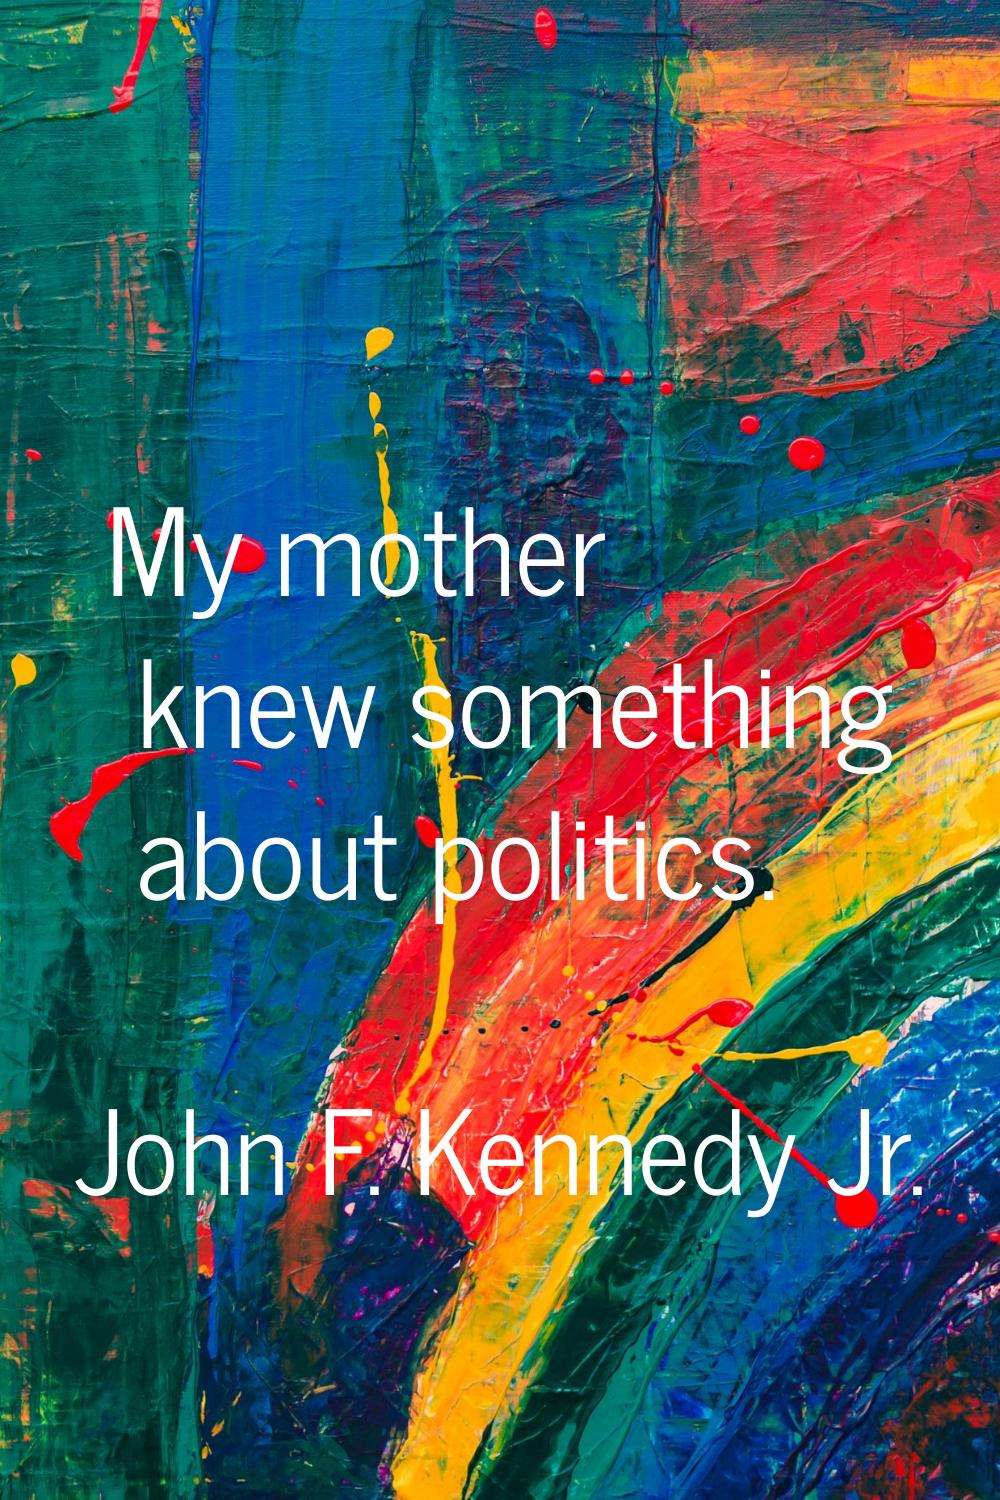 My mother knew something about politics.